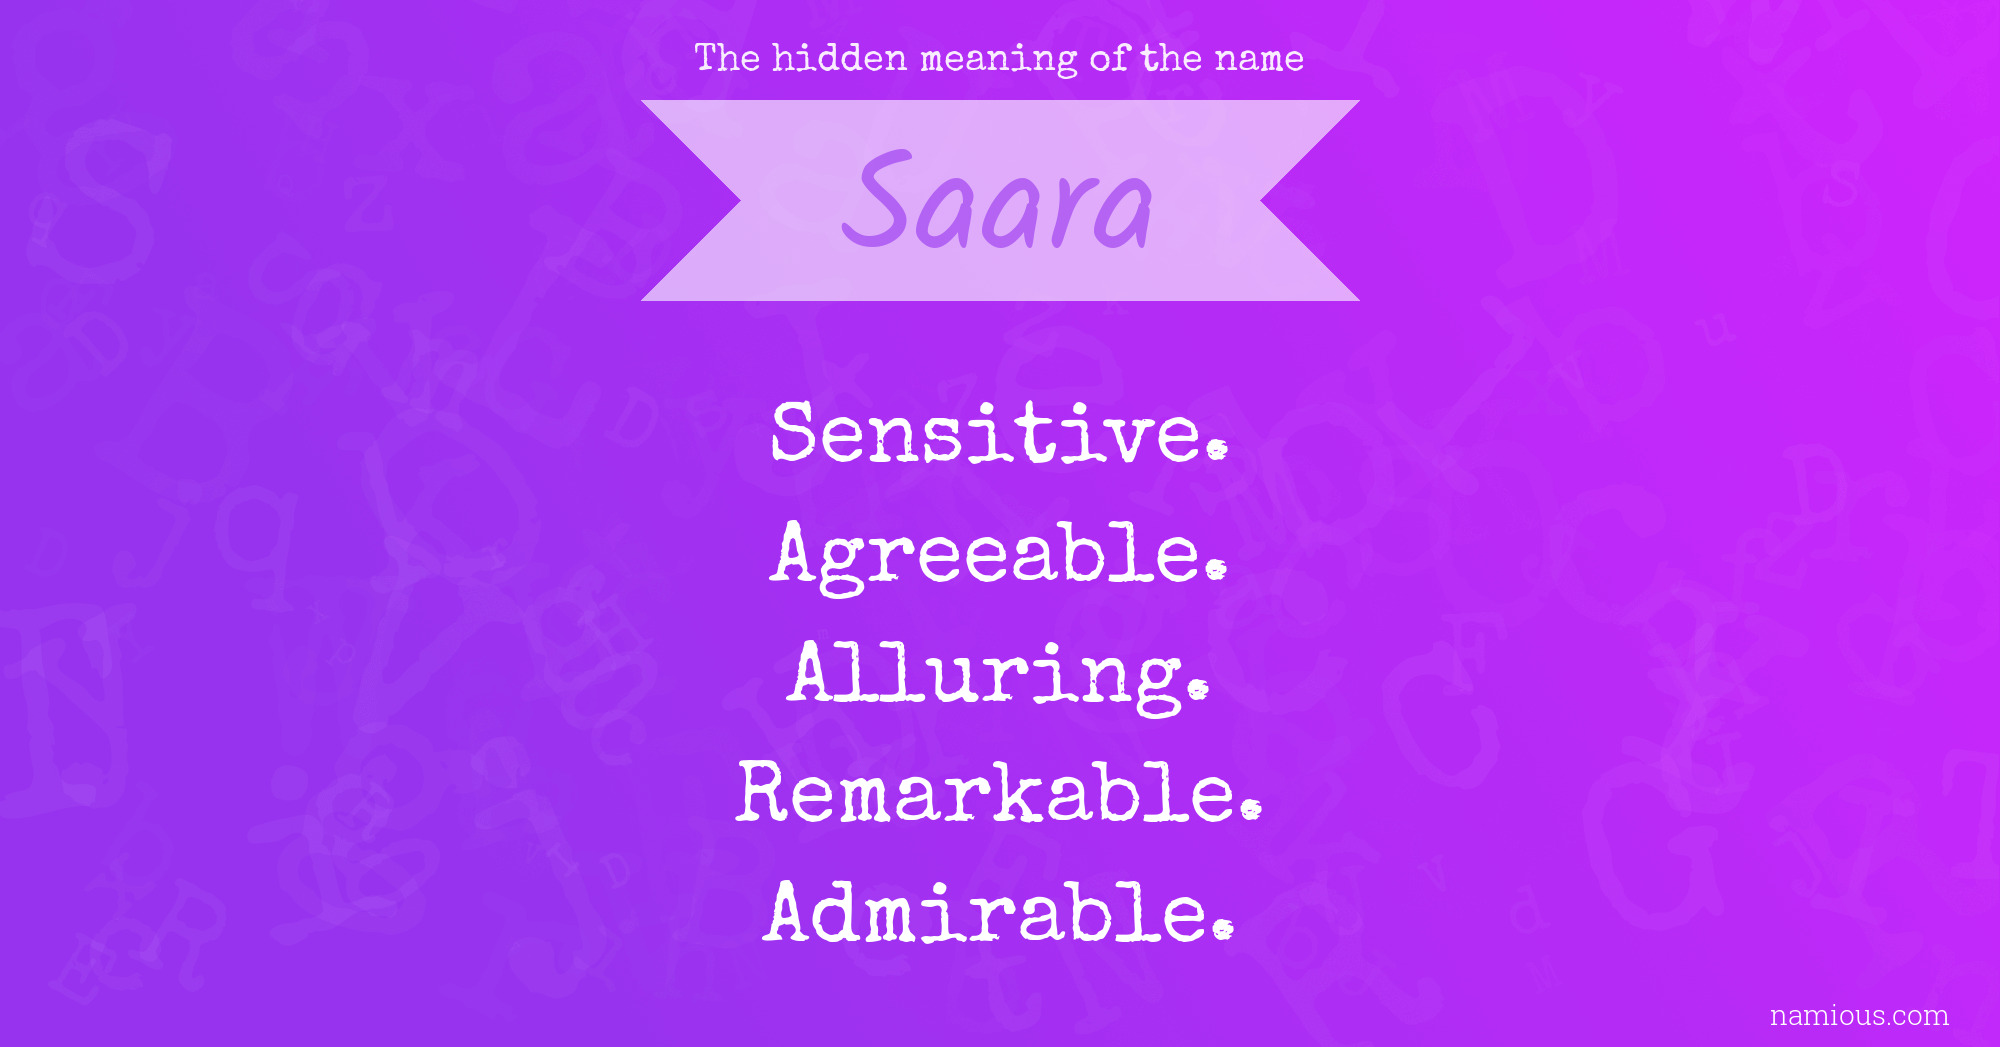 The hidden meaning of the name Saara